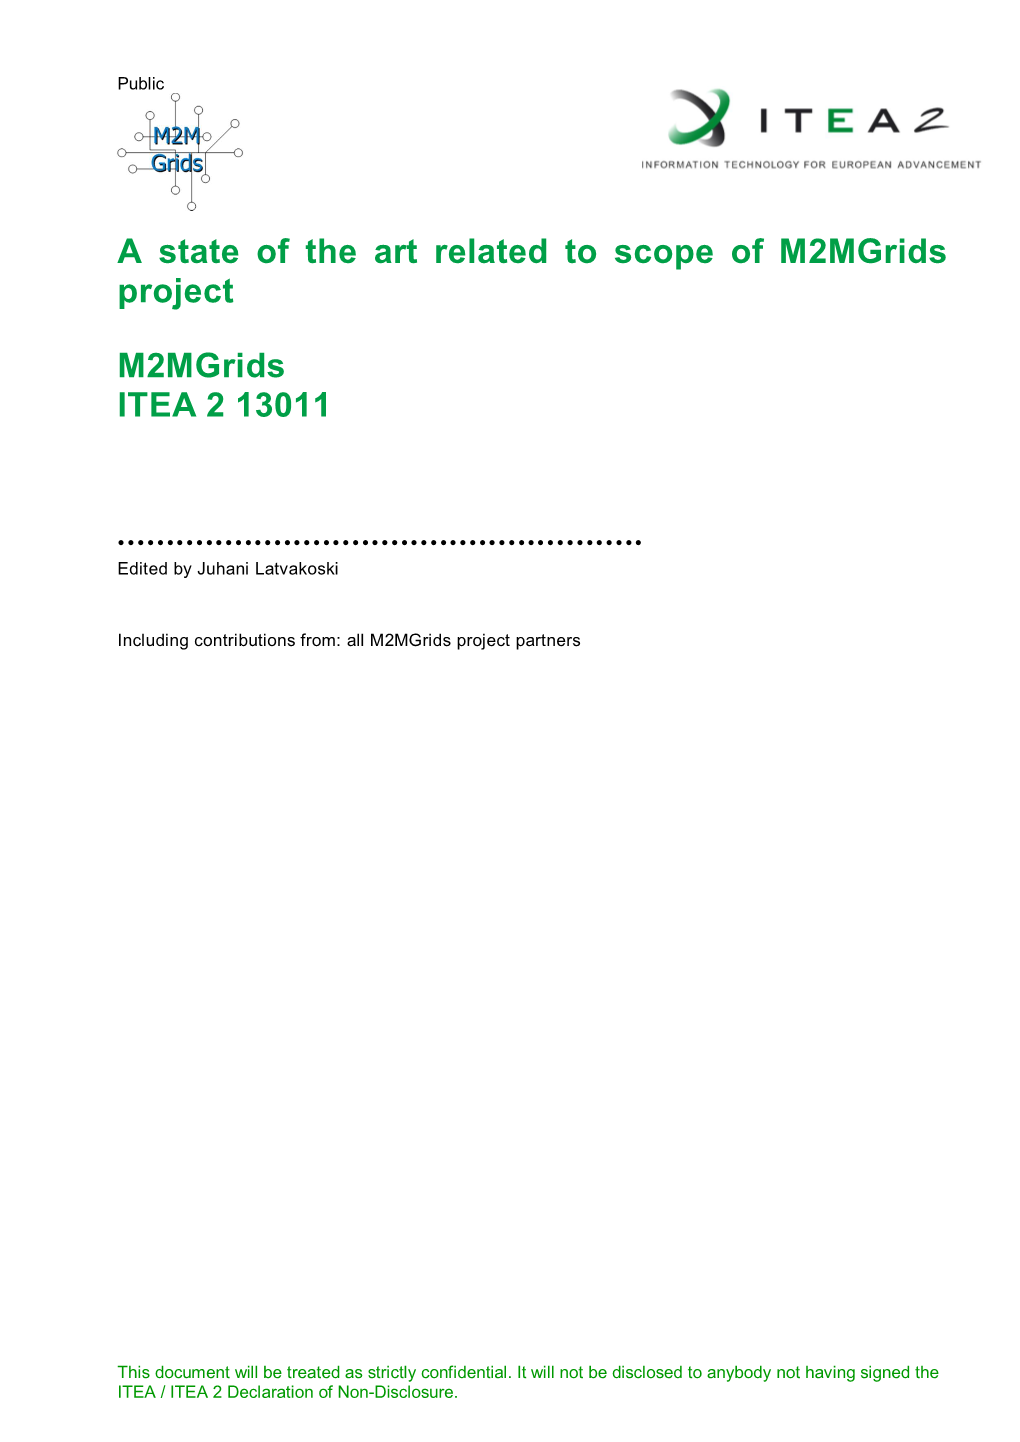 State of the Art Related to M2mgrids Scope